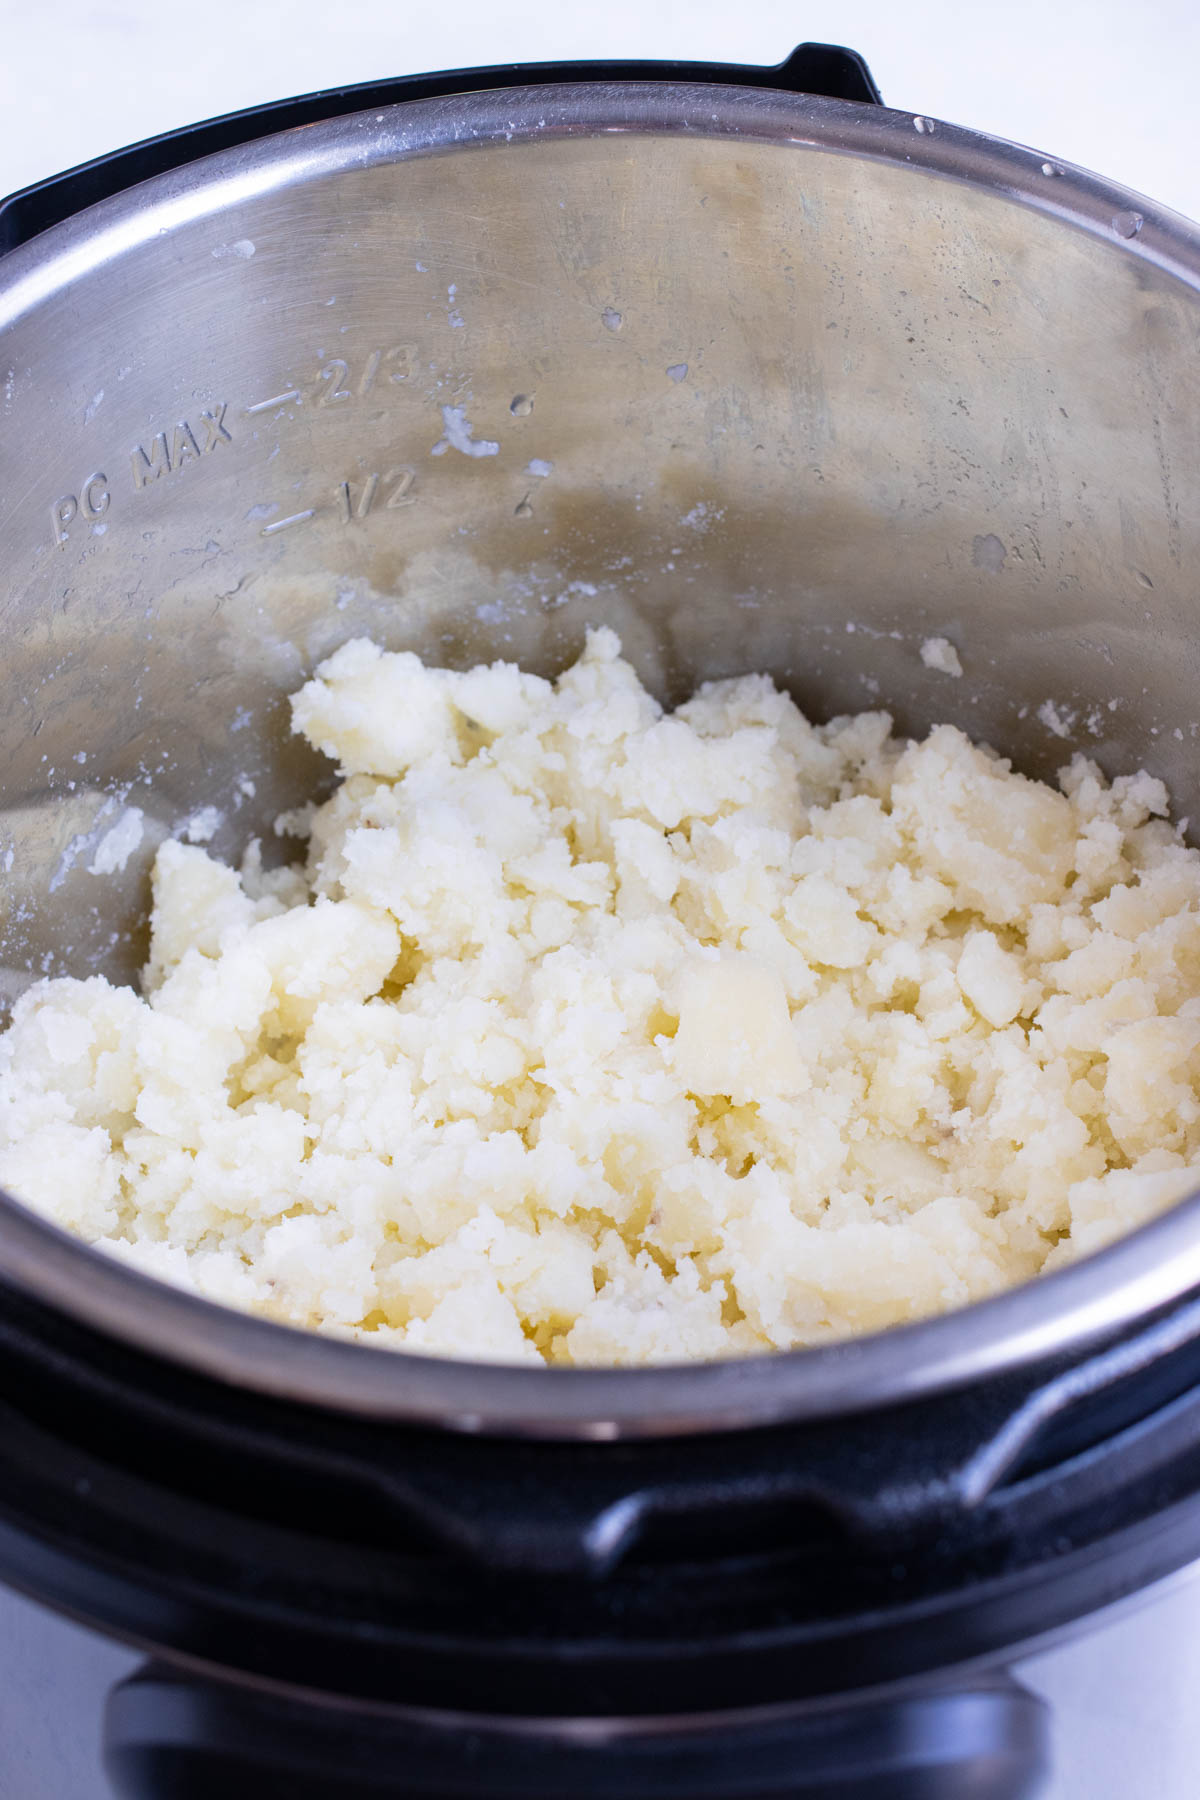 Potatoes are shown mashed in the instant pot.